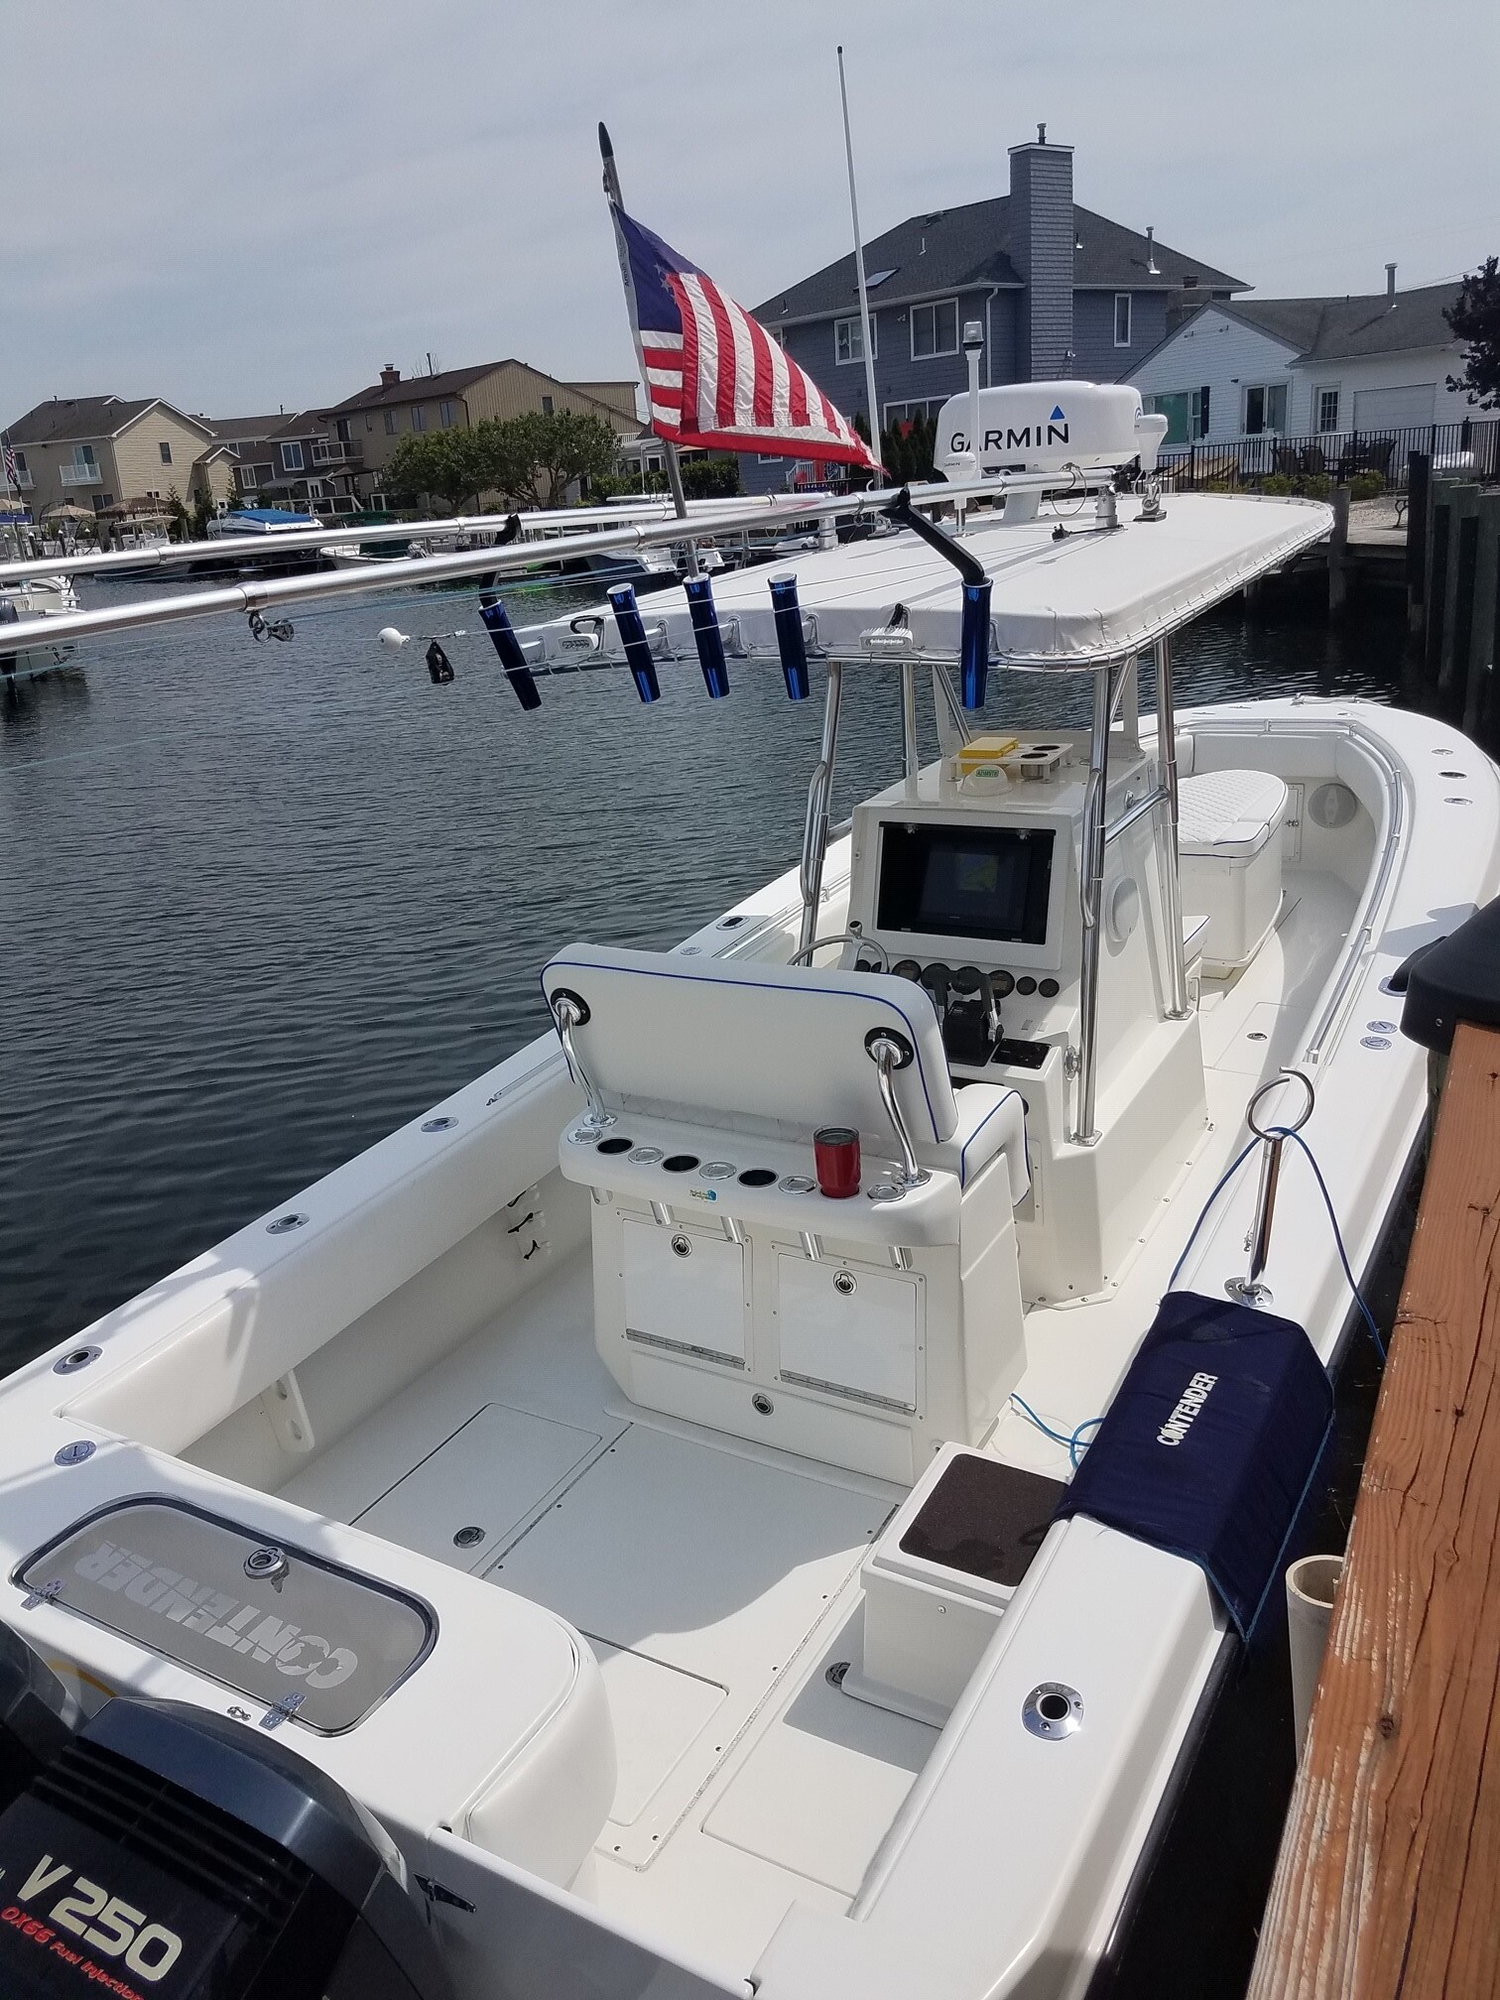 Tiagra 50 WLRSA w/ Crowder Rods (2) - The Hull Truth - Boating and